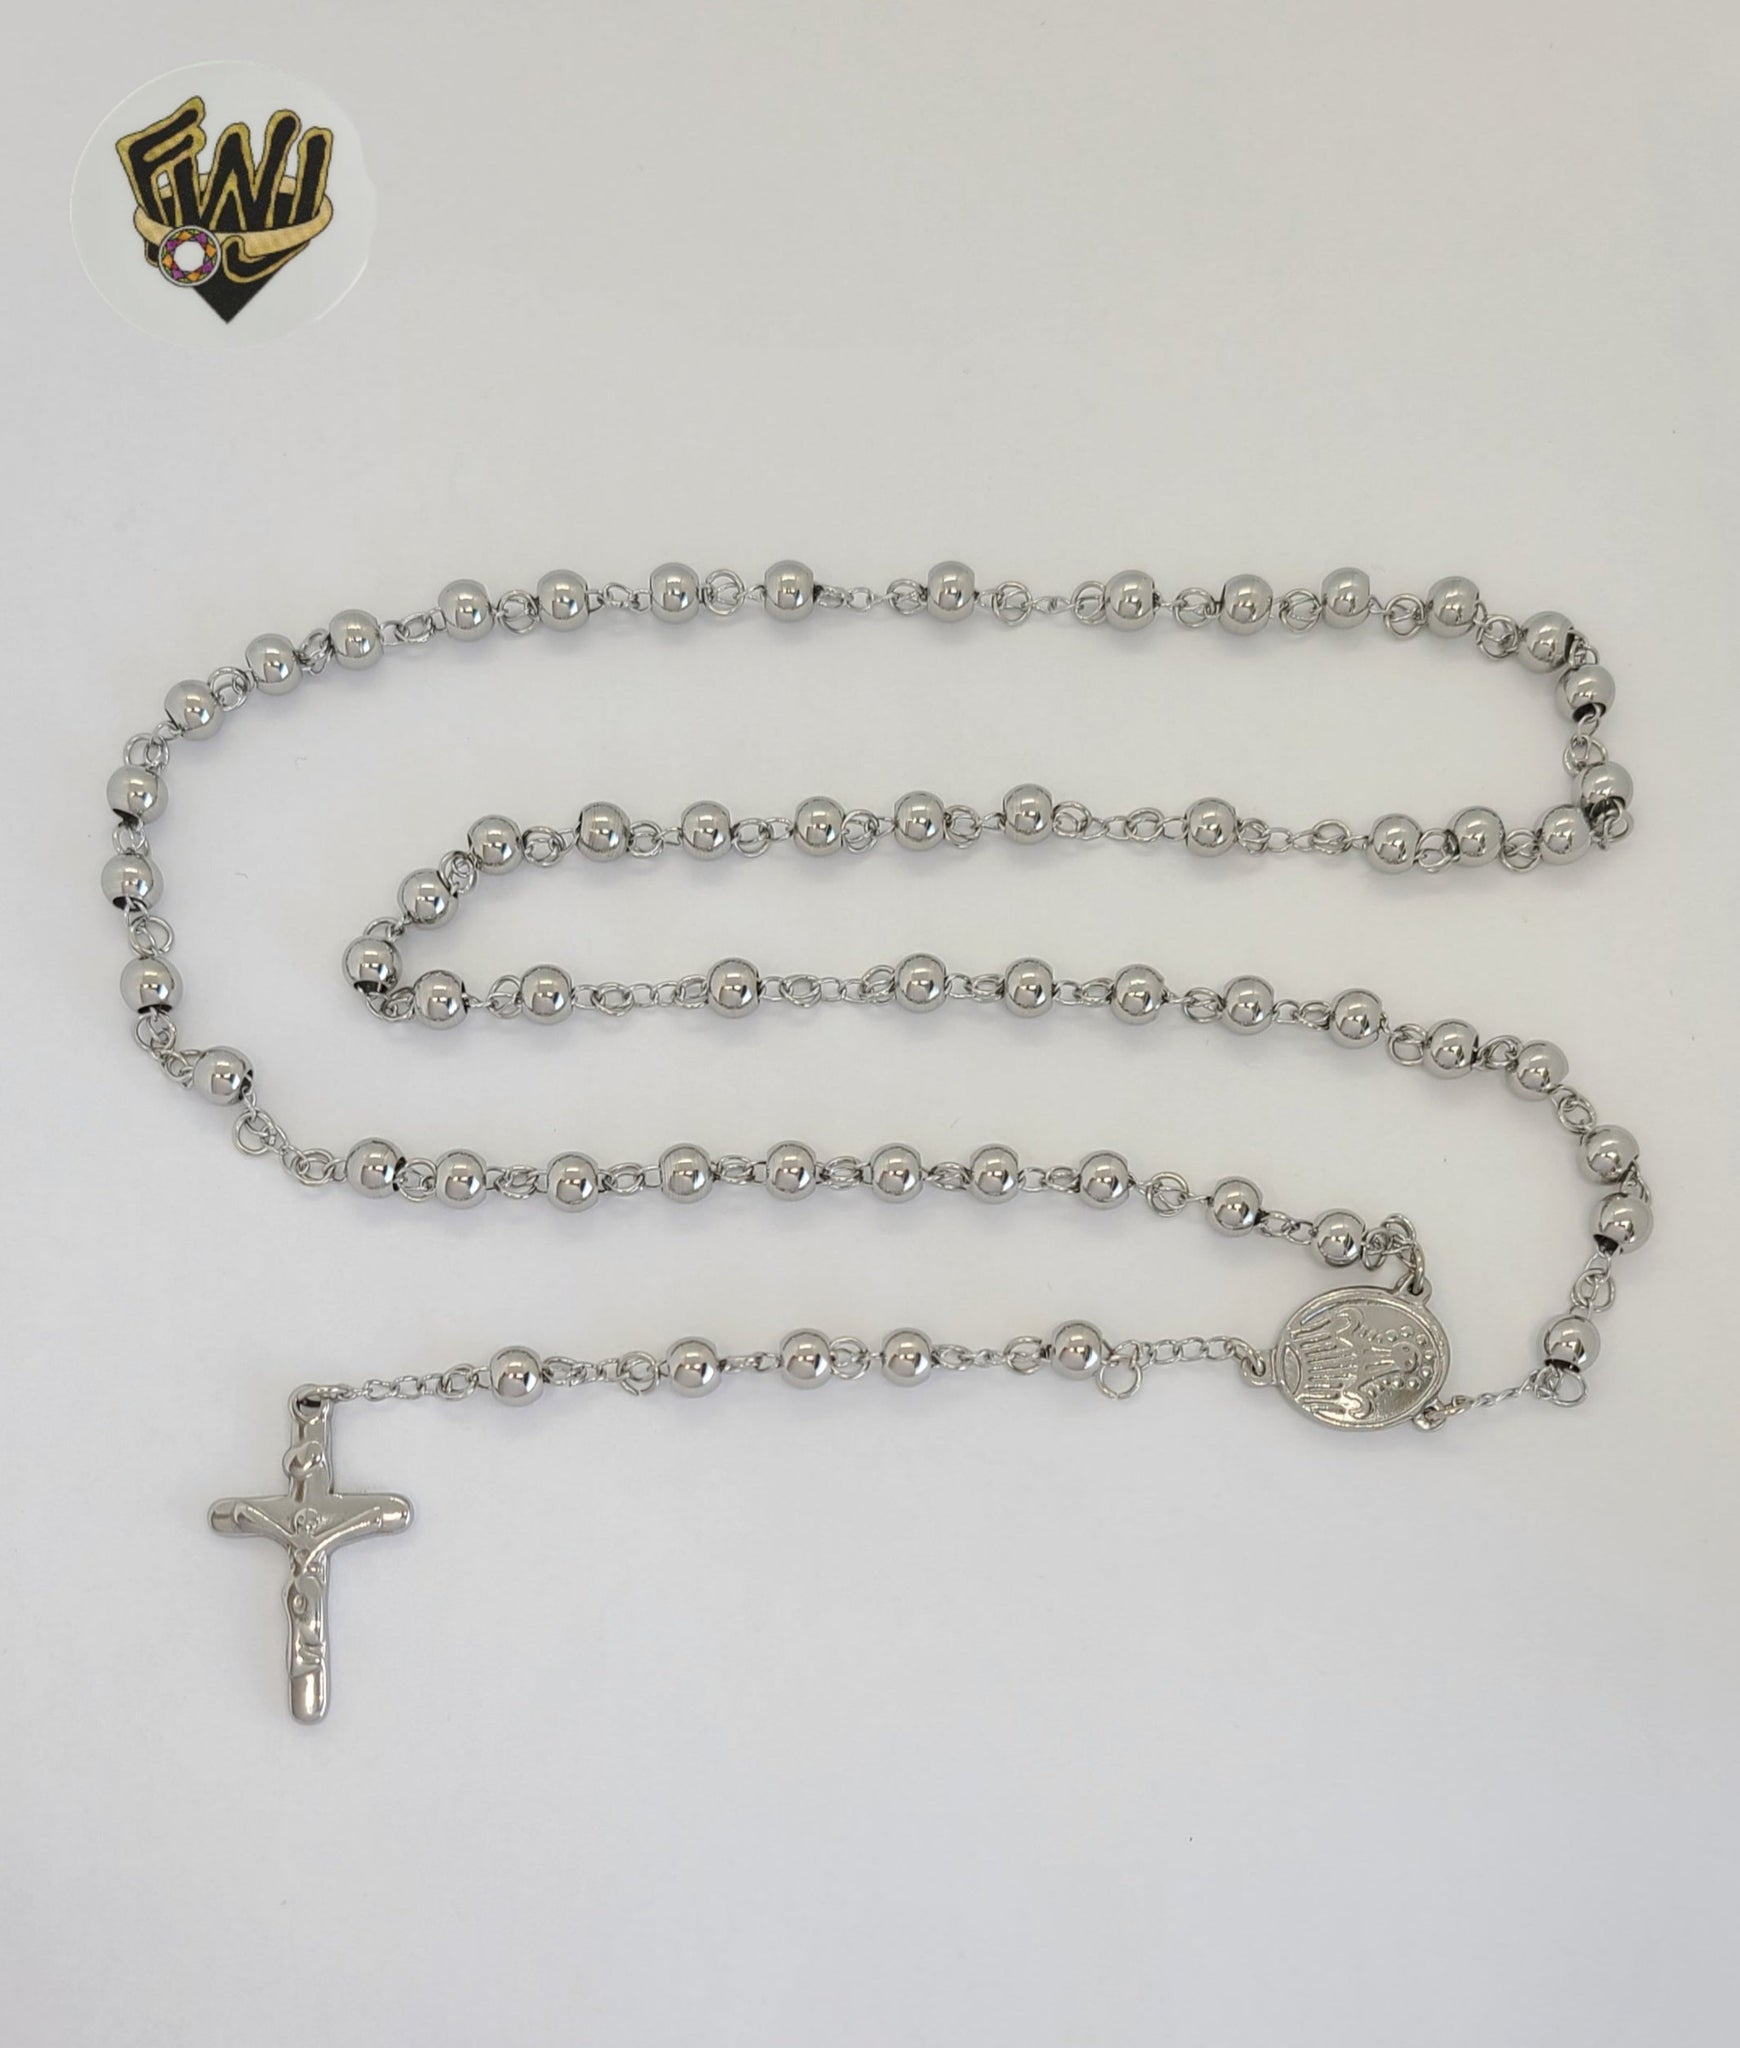 Virgin Mary hematite gemstone and stainless steel rosary bead necklace –  Unique Rosary Beads